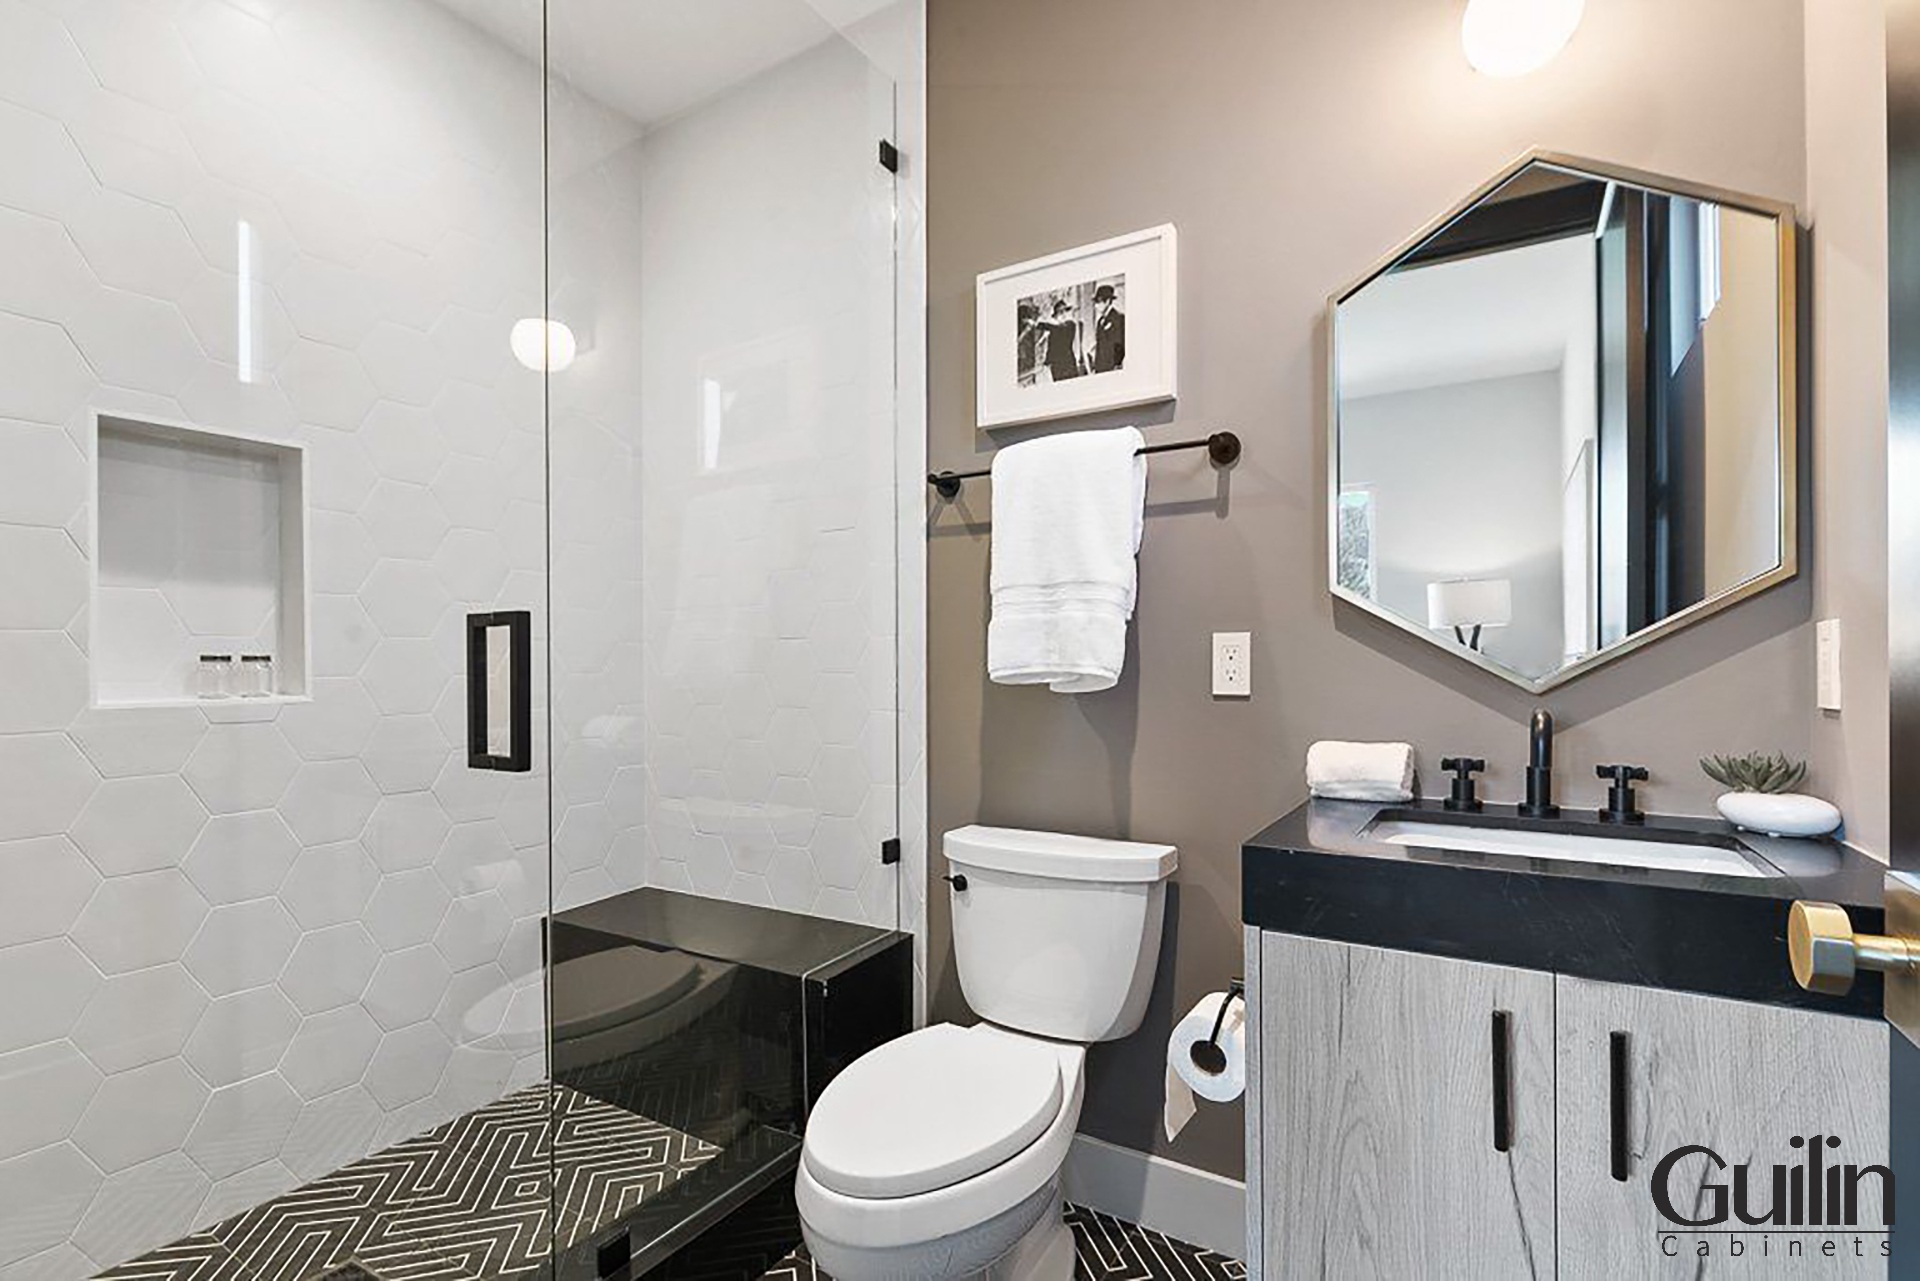 Guest bathrooms are an essential part of any home, and they provide a practical and functional and comfortable space for your visitors